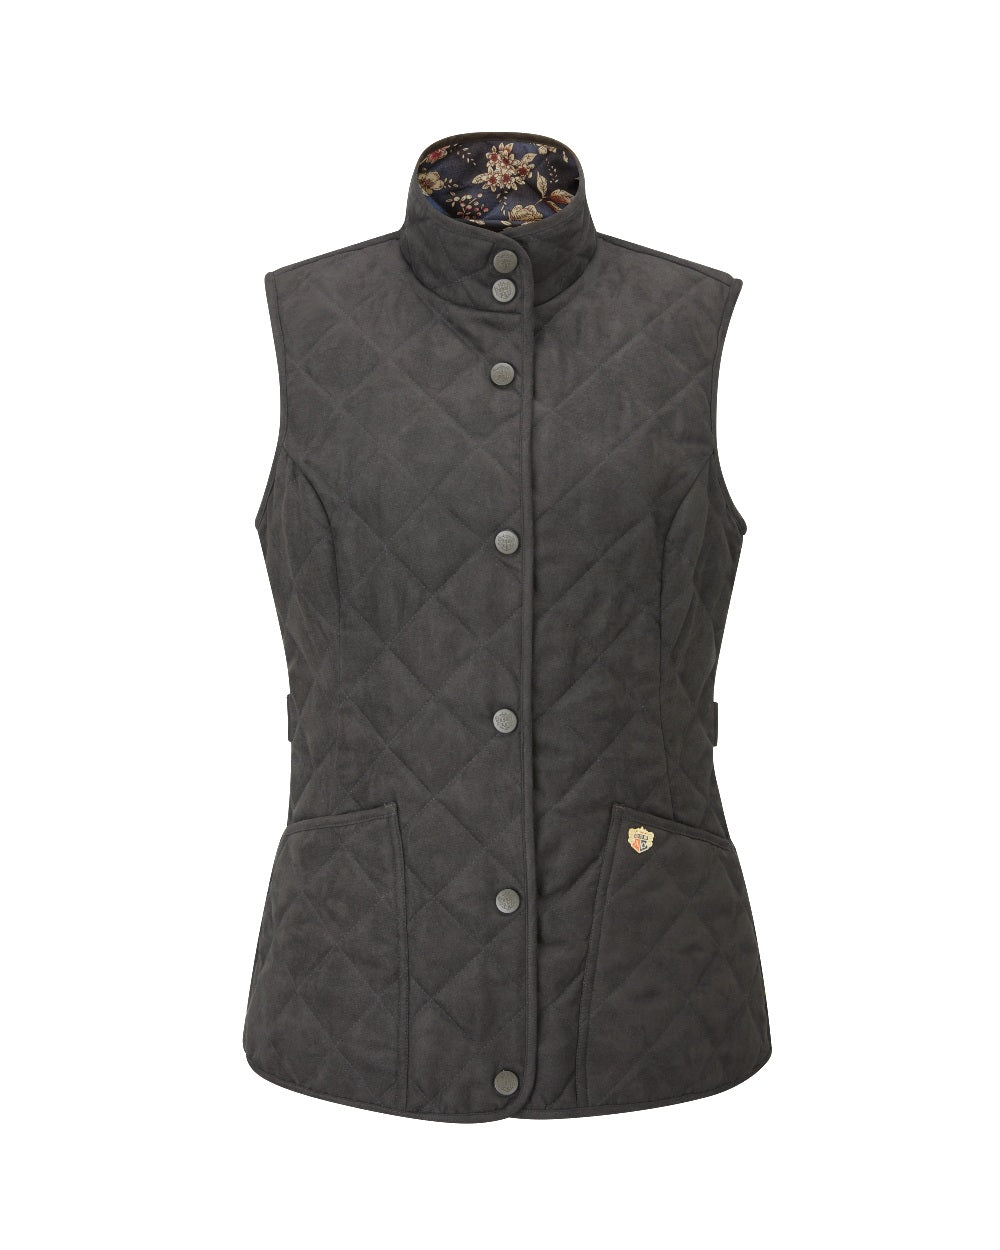 Alan Paine Felwell Womens Gilet in Olive 